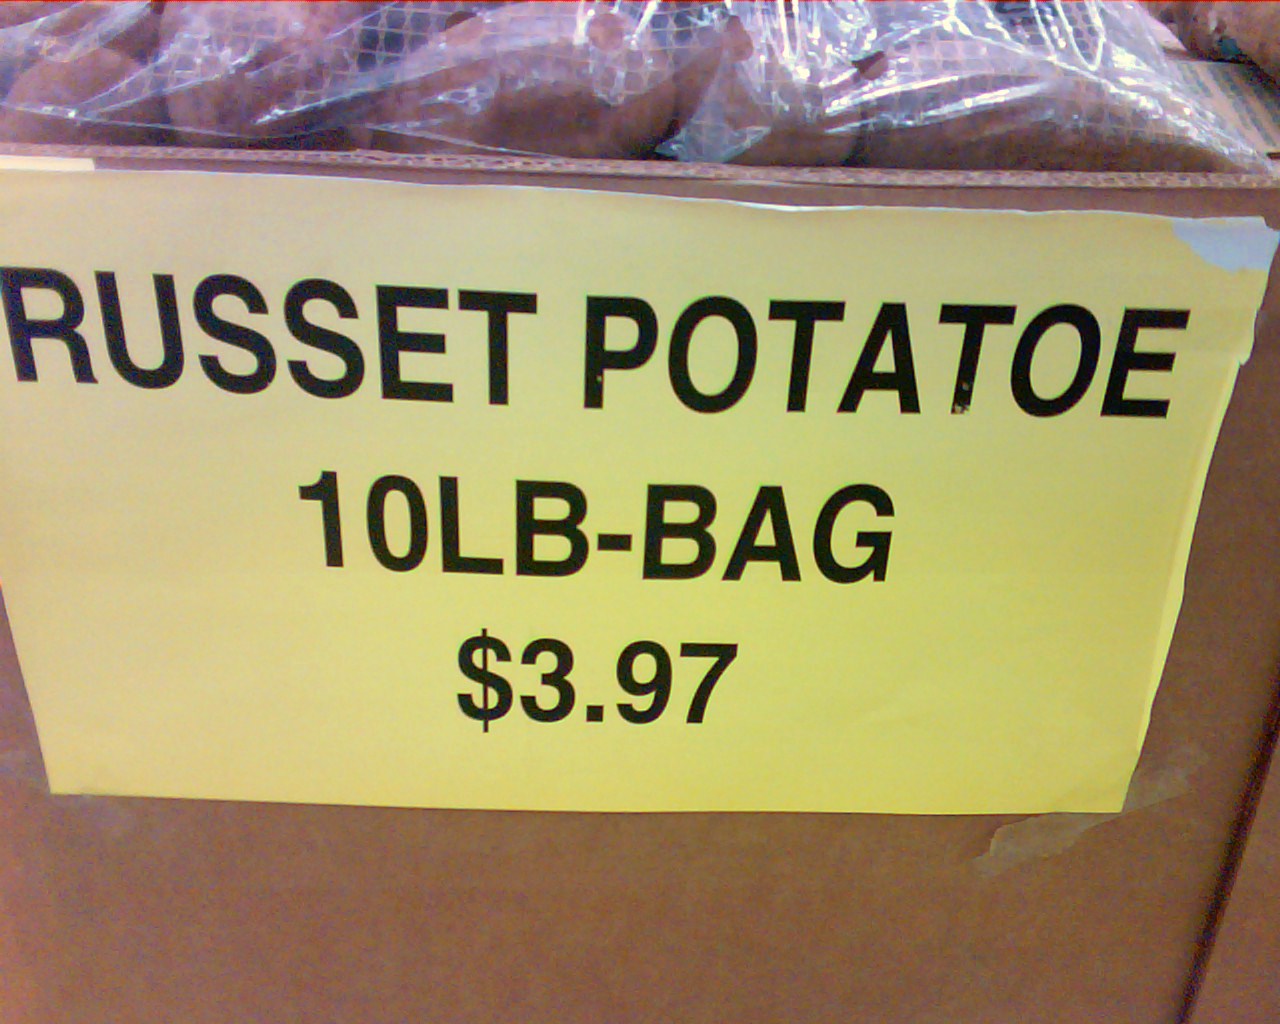 They've probably never heard of Dan Quayle...